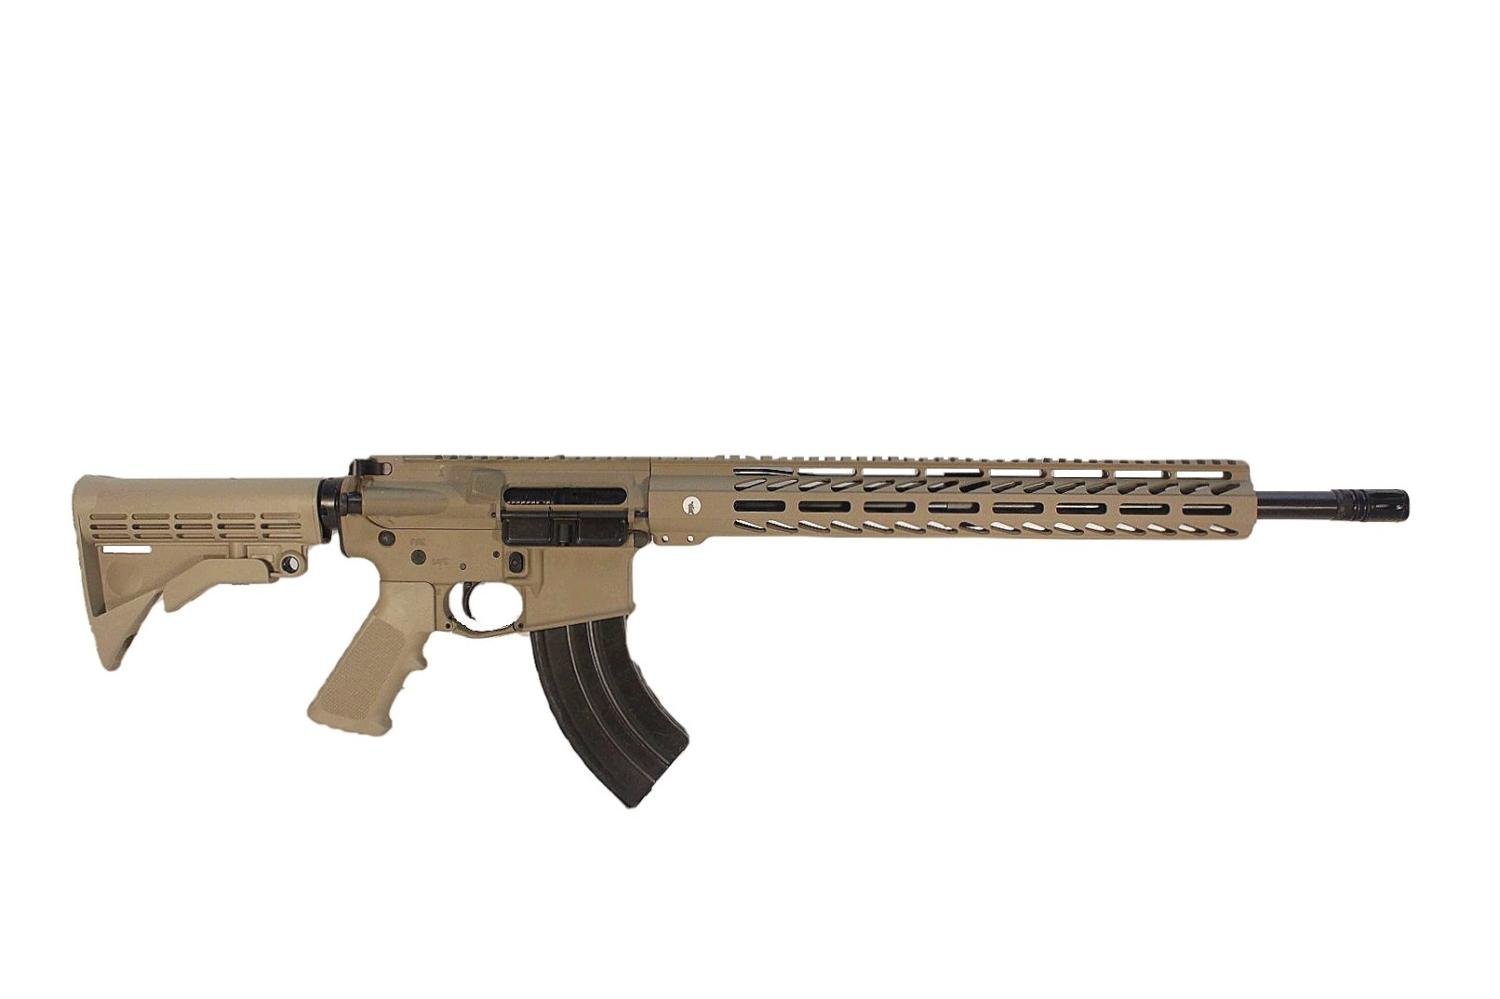 PATRIOT 18 inch 7.62x39 M-LOK AR-15 Rifle - FDE - $781.99 after 15% code